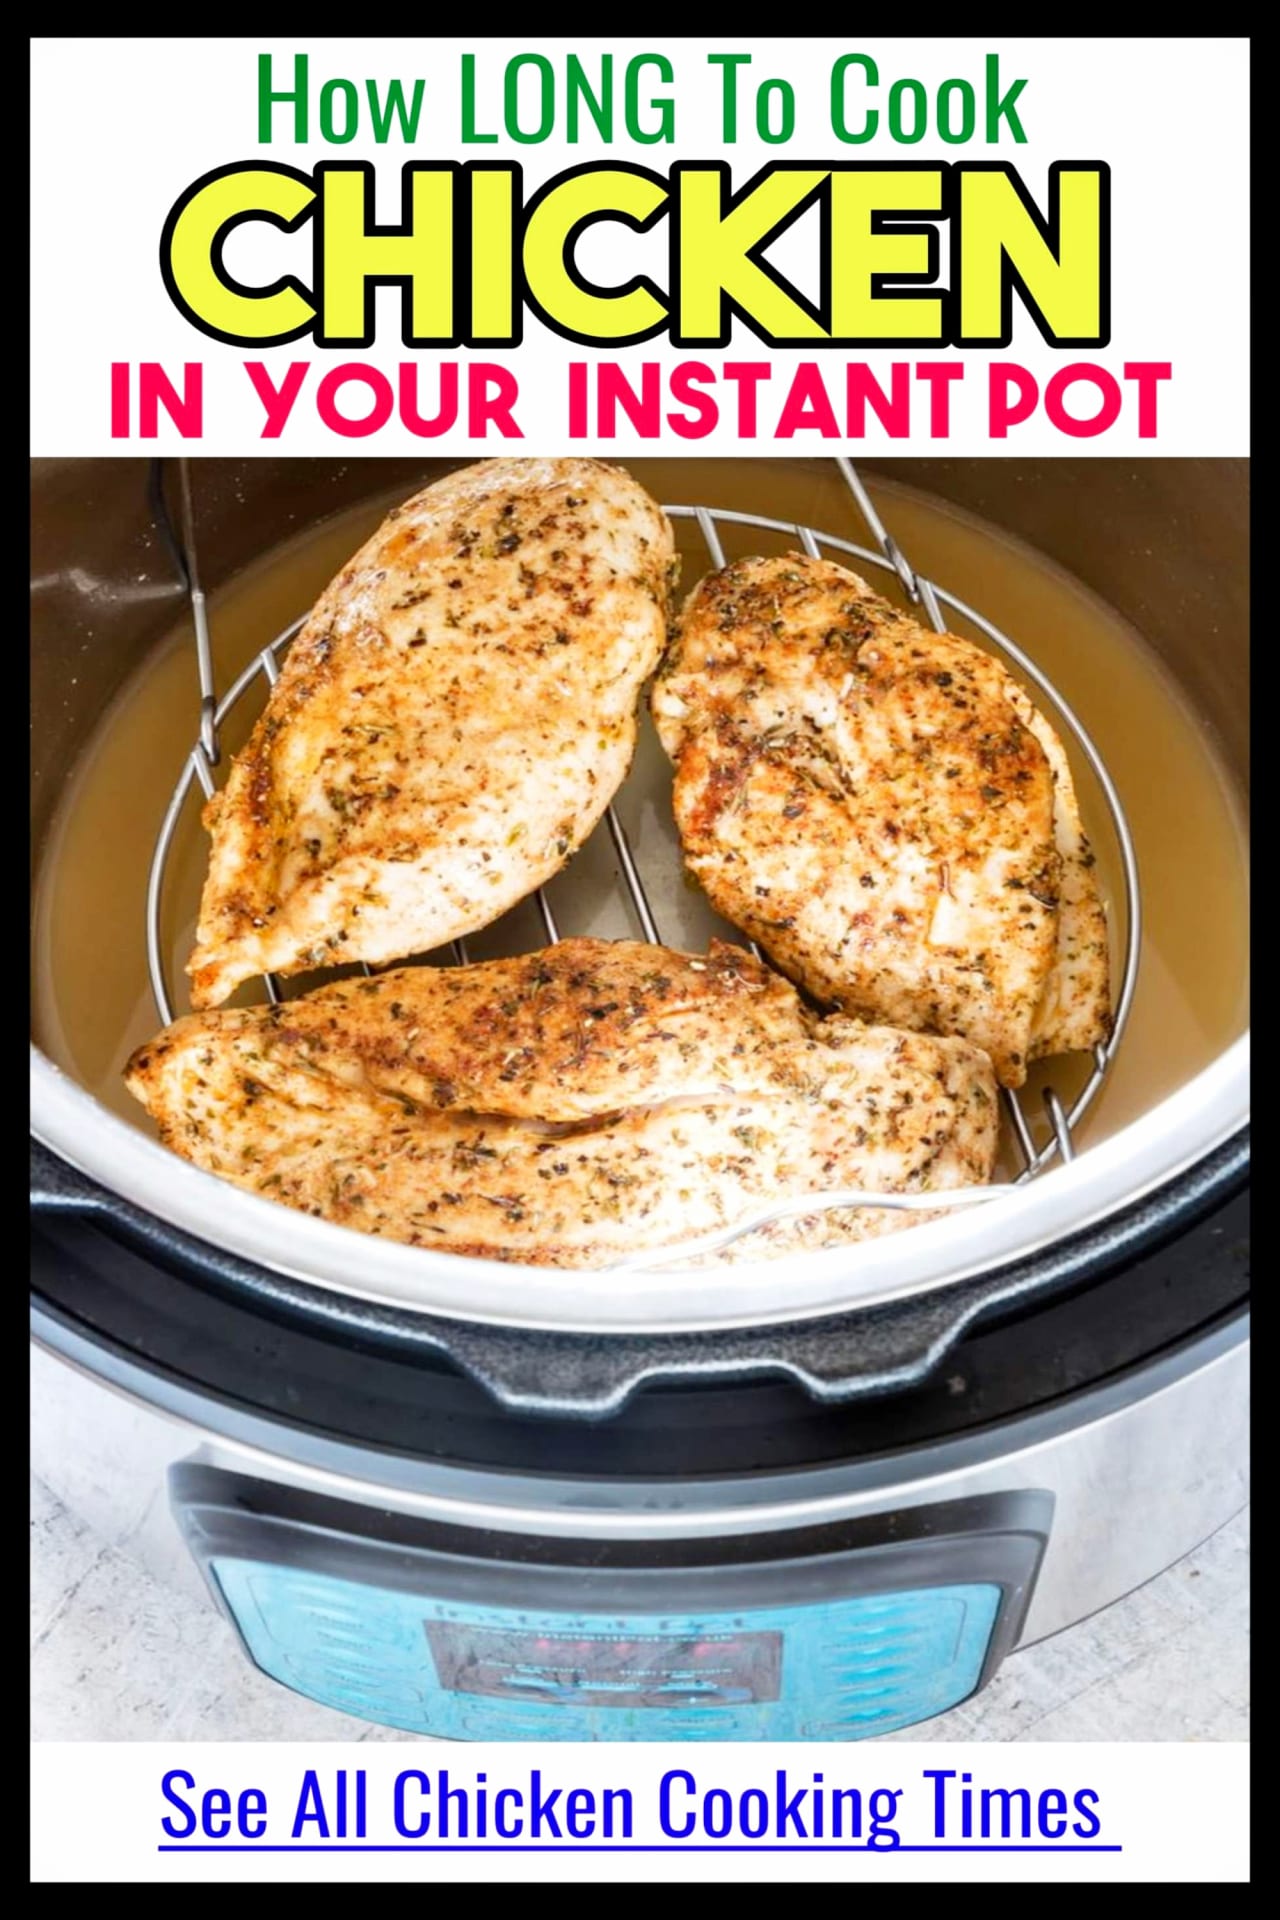 Instant Pot Recipes- easy dinner recipes cooking with an Instant Pot one pot pressure cooker - also, Instant Pot cooking times cheat sheets and cooking times for chicken